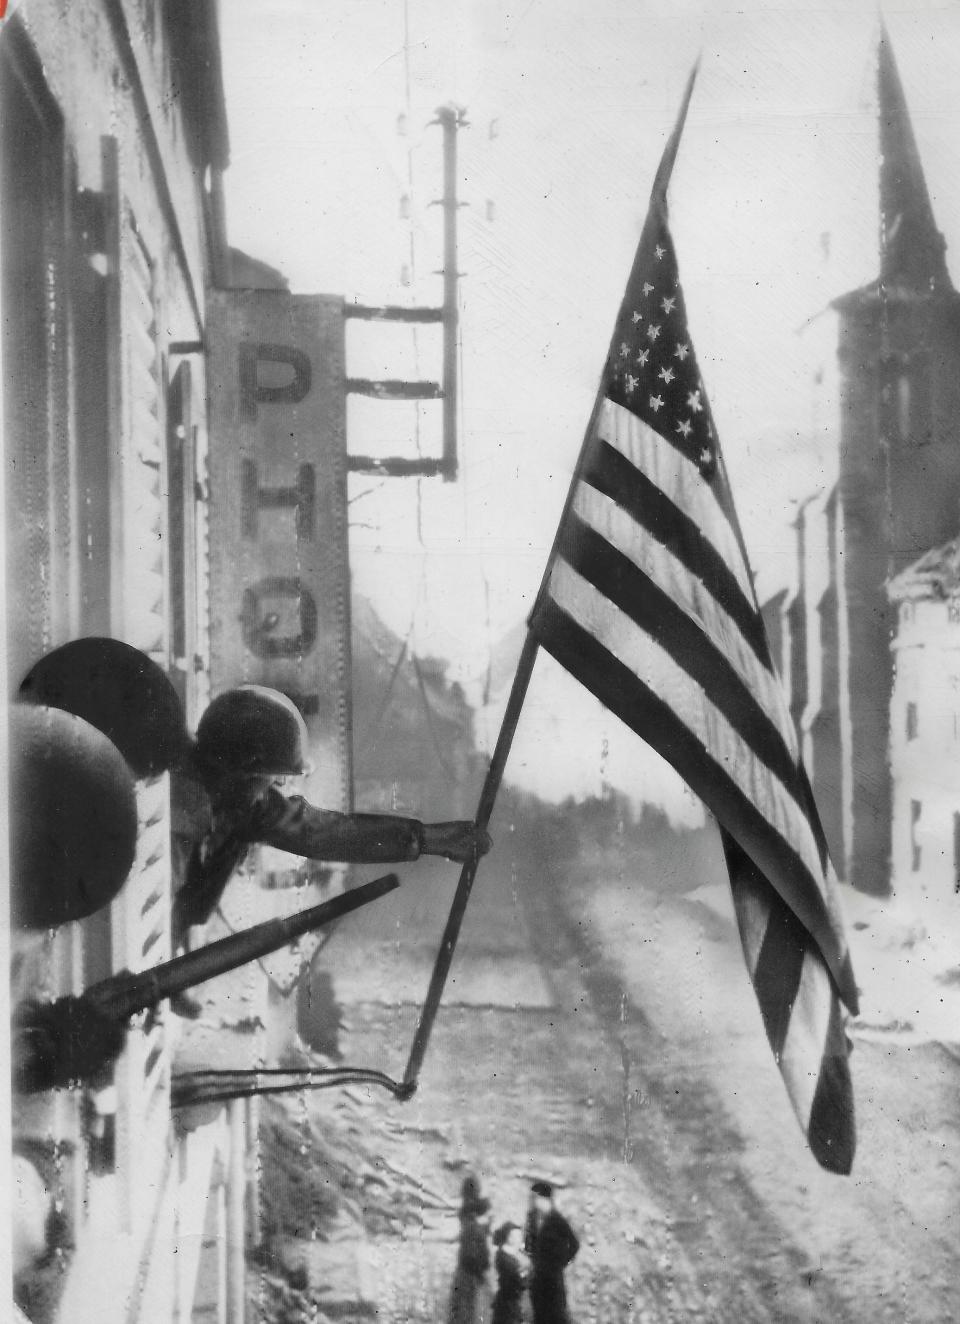 U.S. Army Capt. Thomas H. Garahan of Brooklyn, New York, hangs an American flag from a window after troops liberated a French village from German occupation in March 1945.